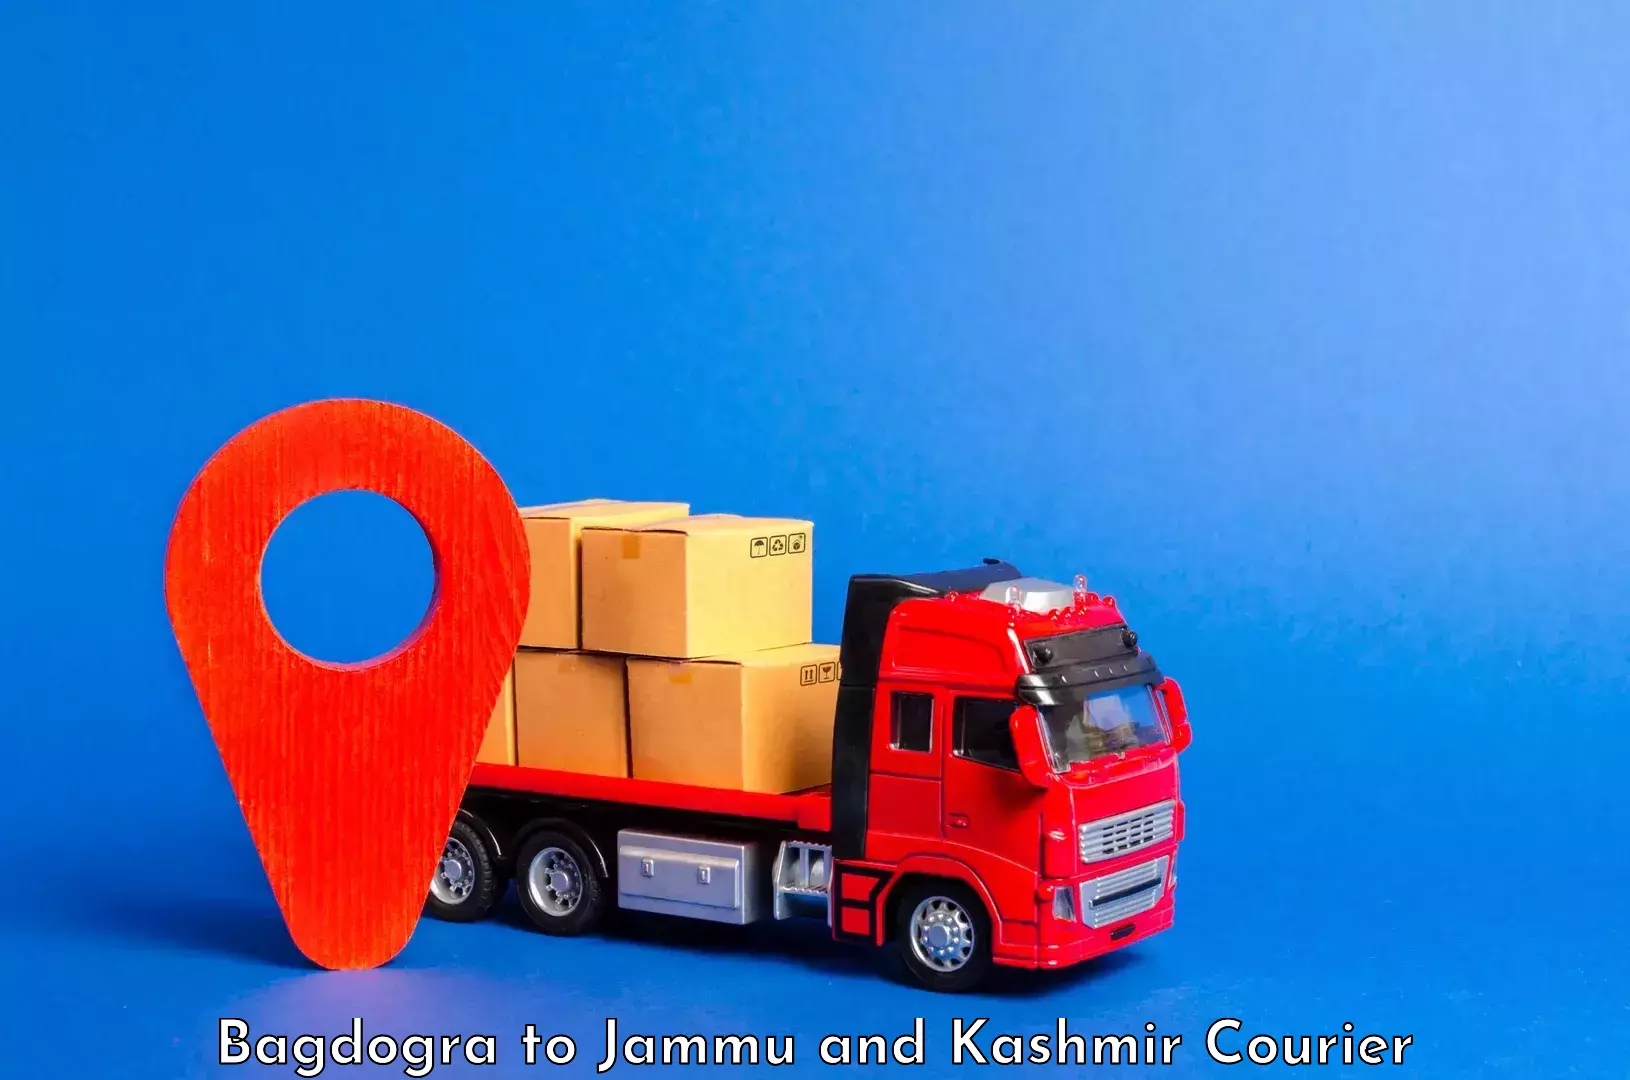 Baggage delivery planning Bagdogra to Baramulla